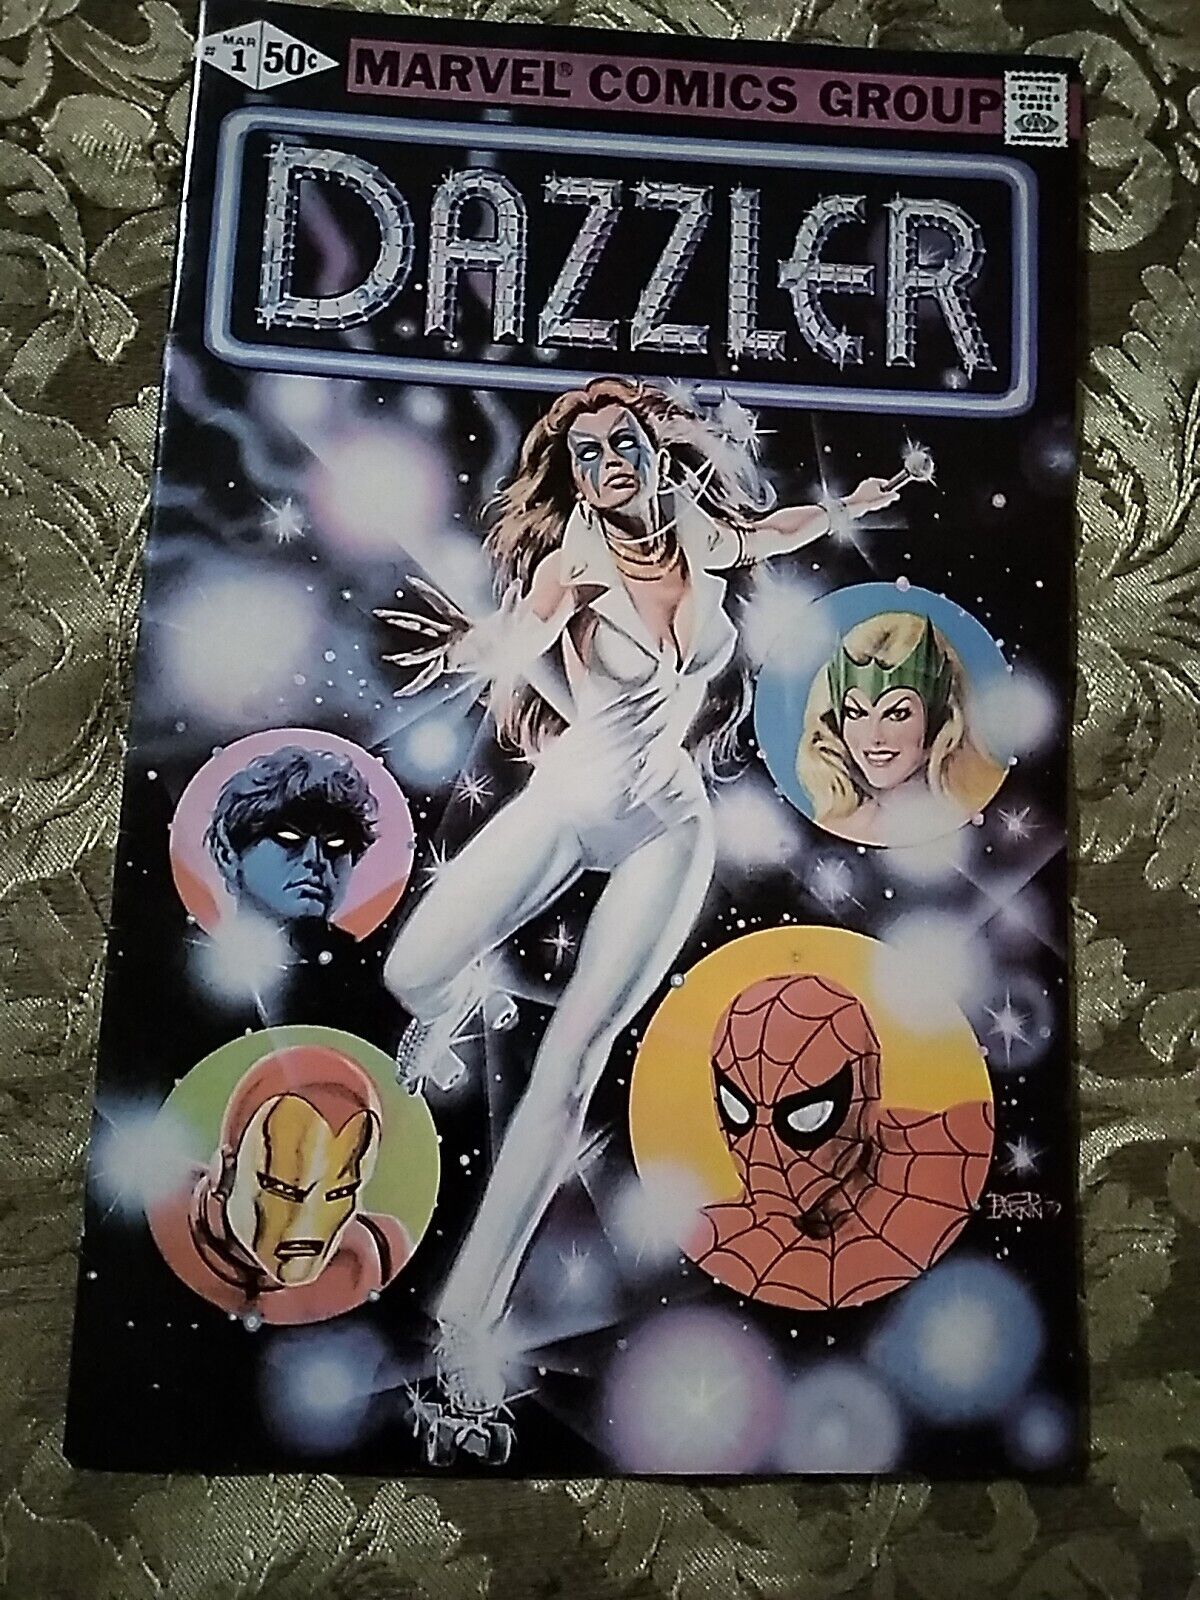 BOTH Dazzler #1 (1981) NM   & RARE Taylor Swift #1 ONLY 200 PRINTED